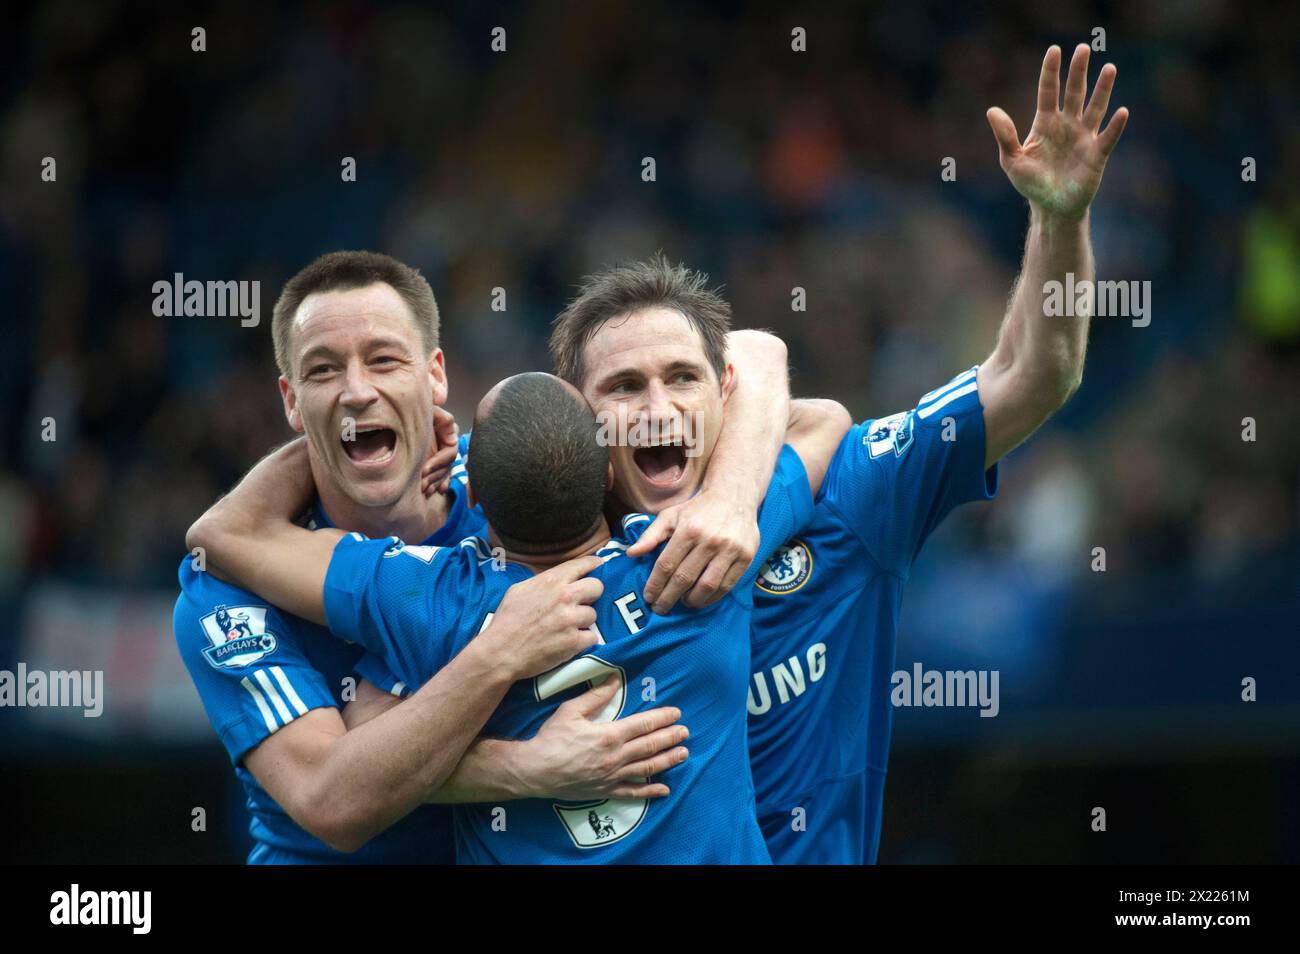 Chelsea v Wigan  Pictured celebrating after the chelsea win John Terry Ashley Cole and Frank Lampard   pic by gavinrodgers/Pixel 07917221968 Stock Photo